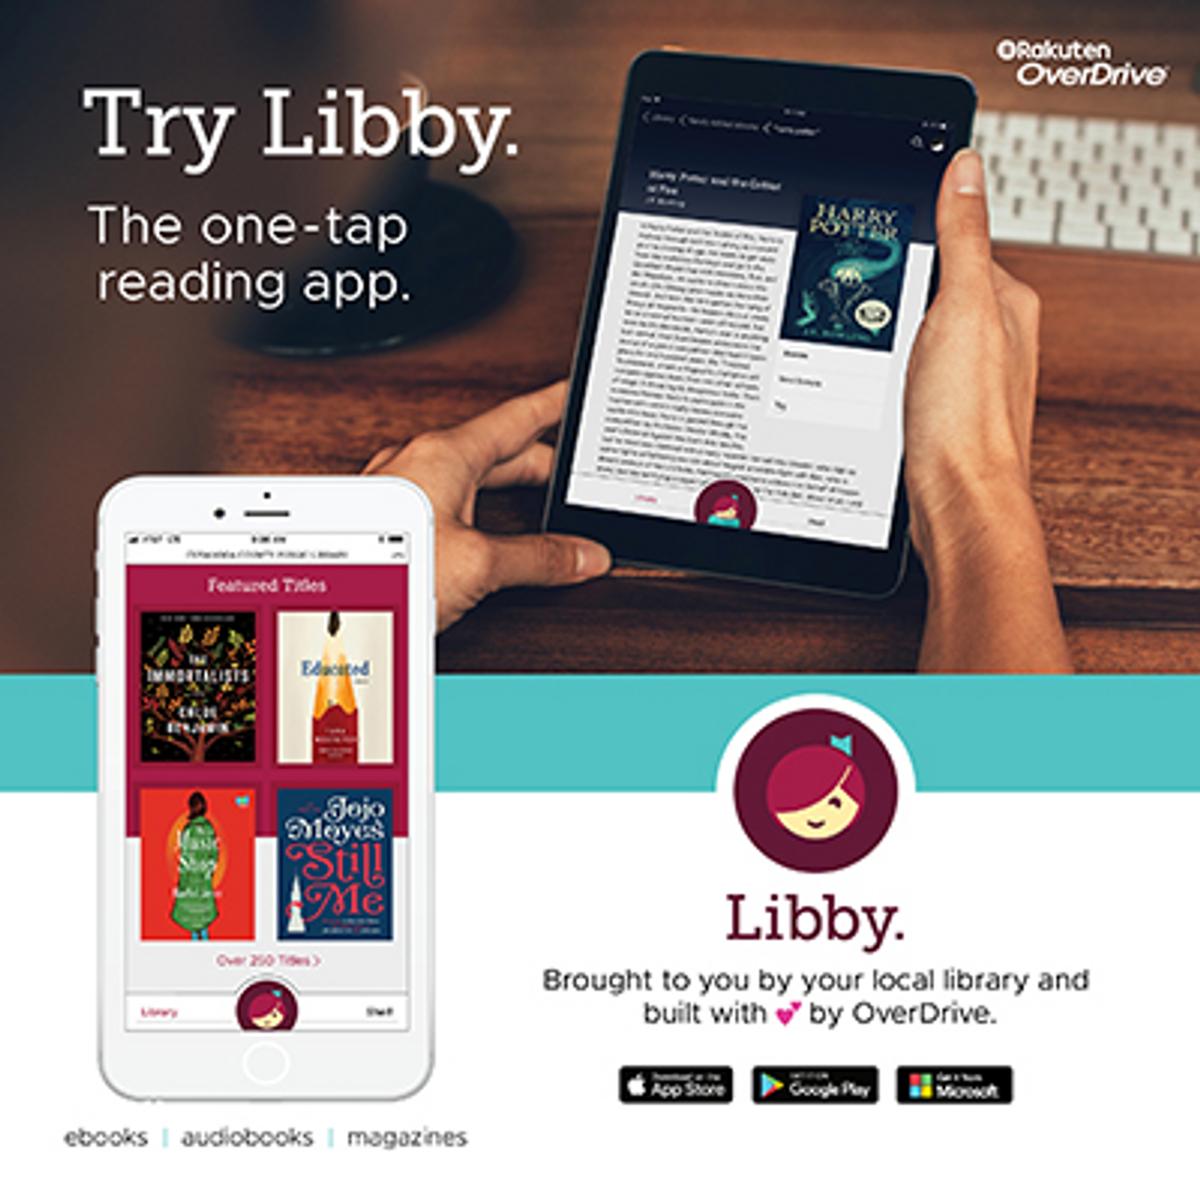 try libby the one-tap reading app